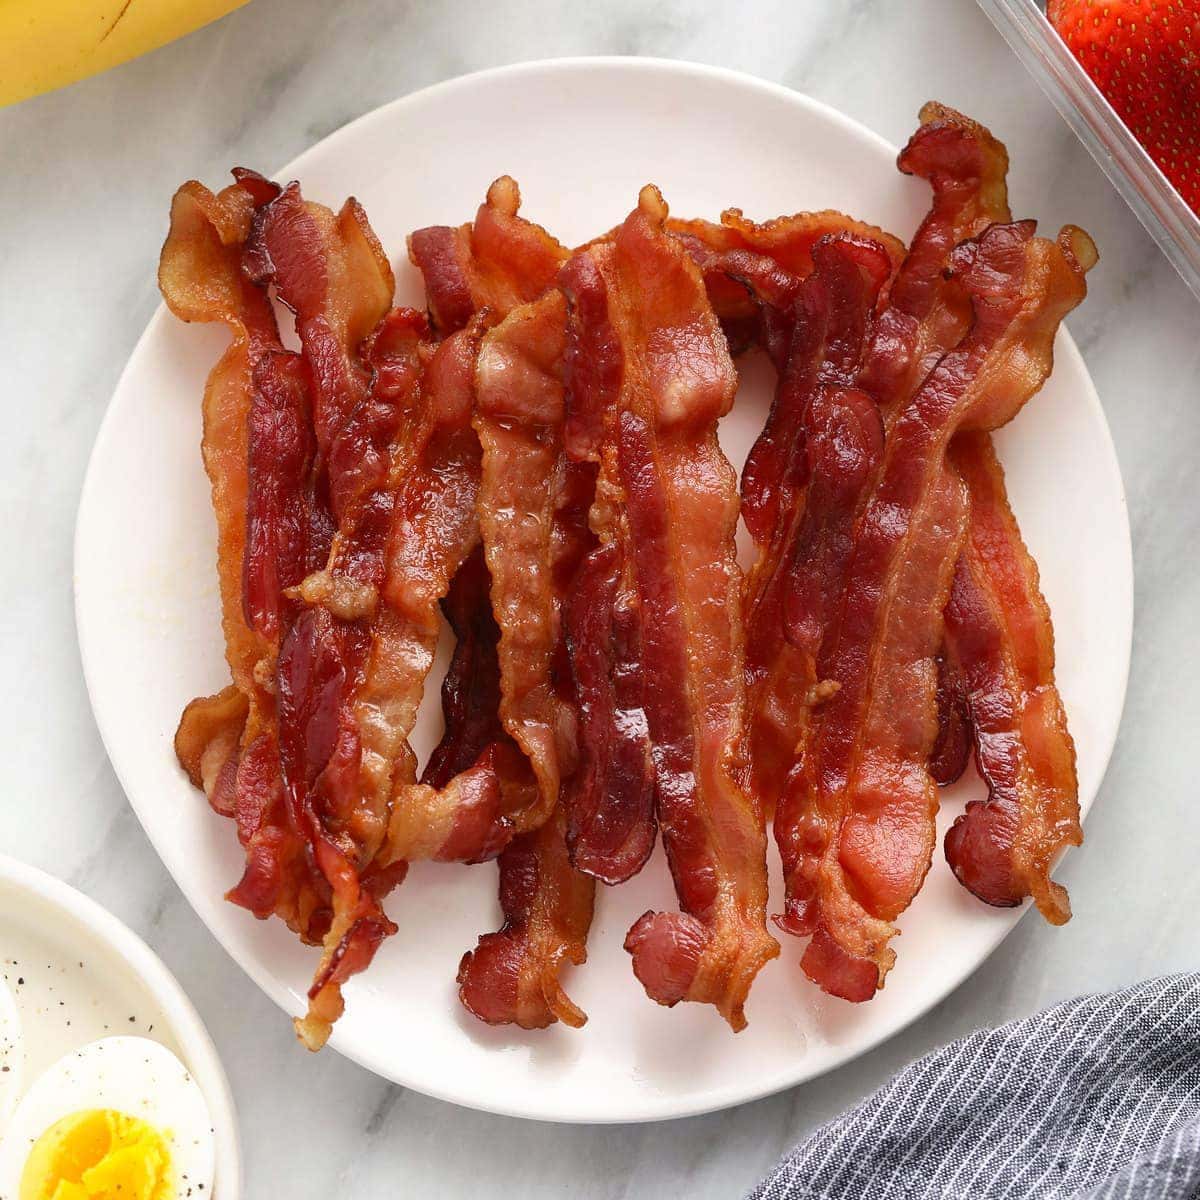 Microwave bacon tray - make bacon in the microwave